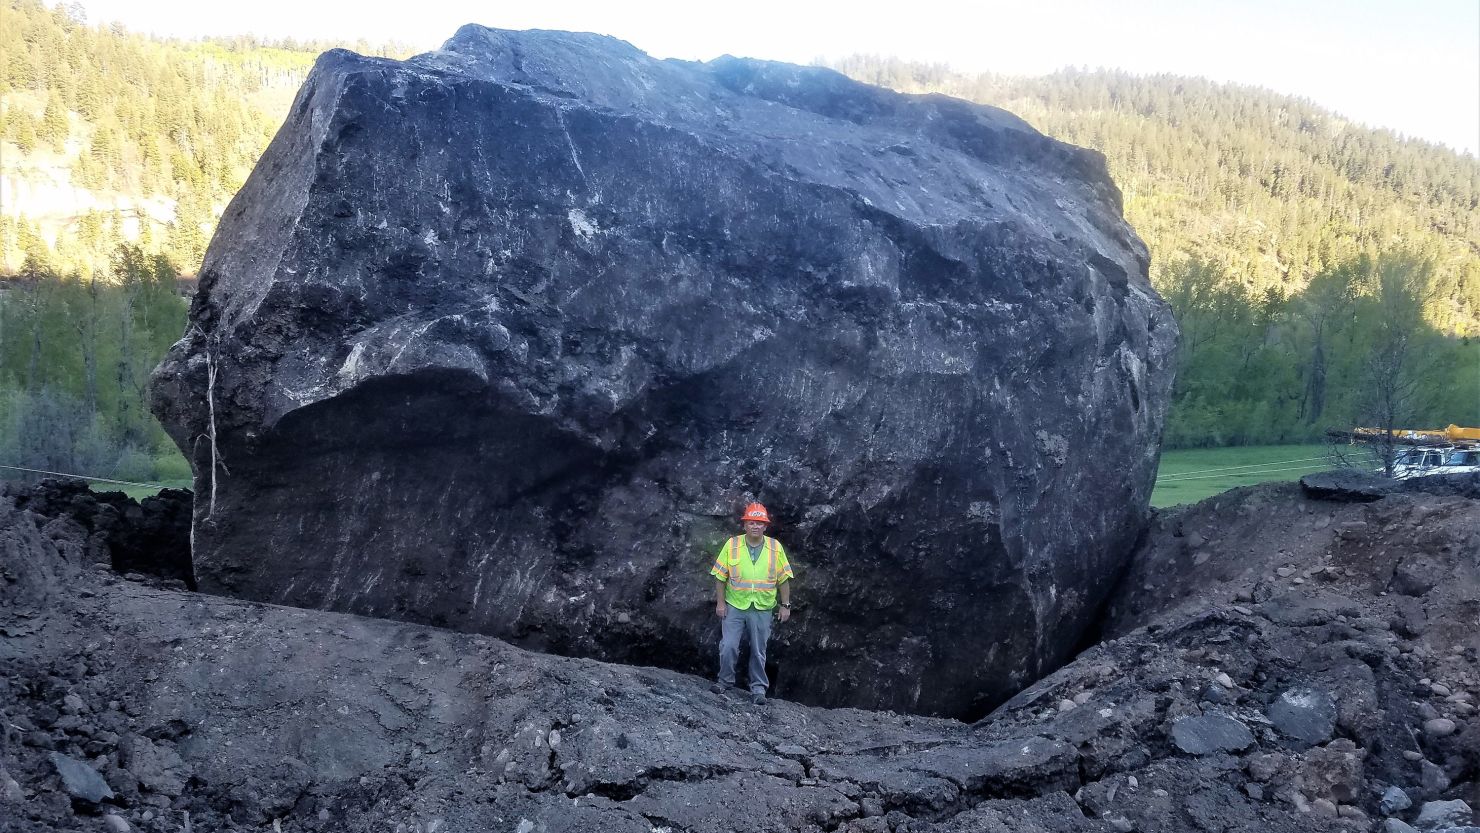 The Colorado Department of Transportation describes the boulder as the size of a building.